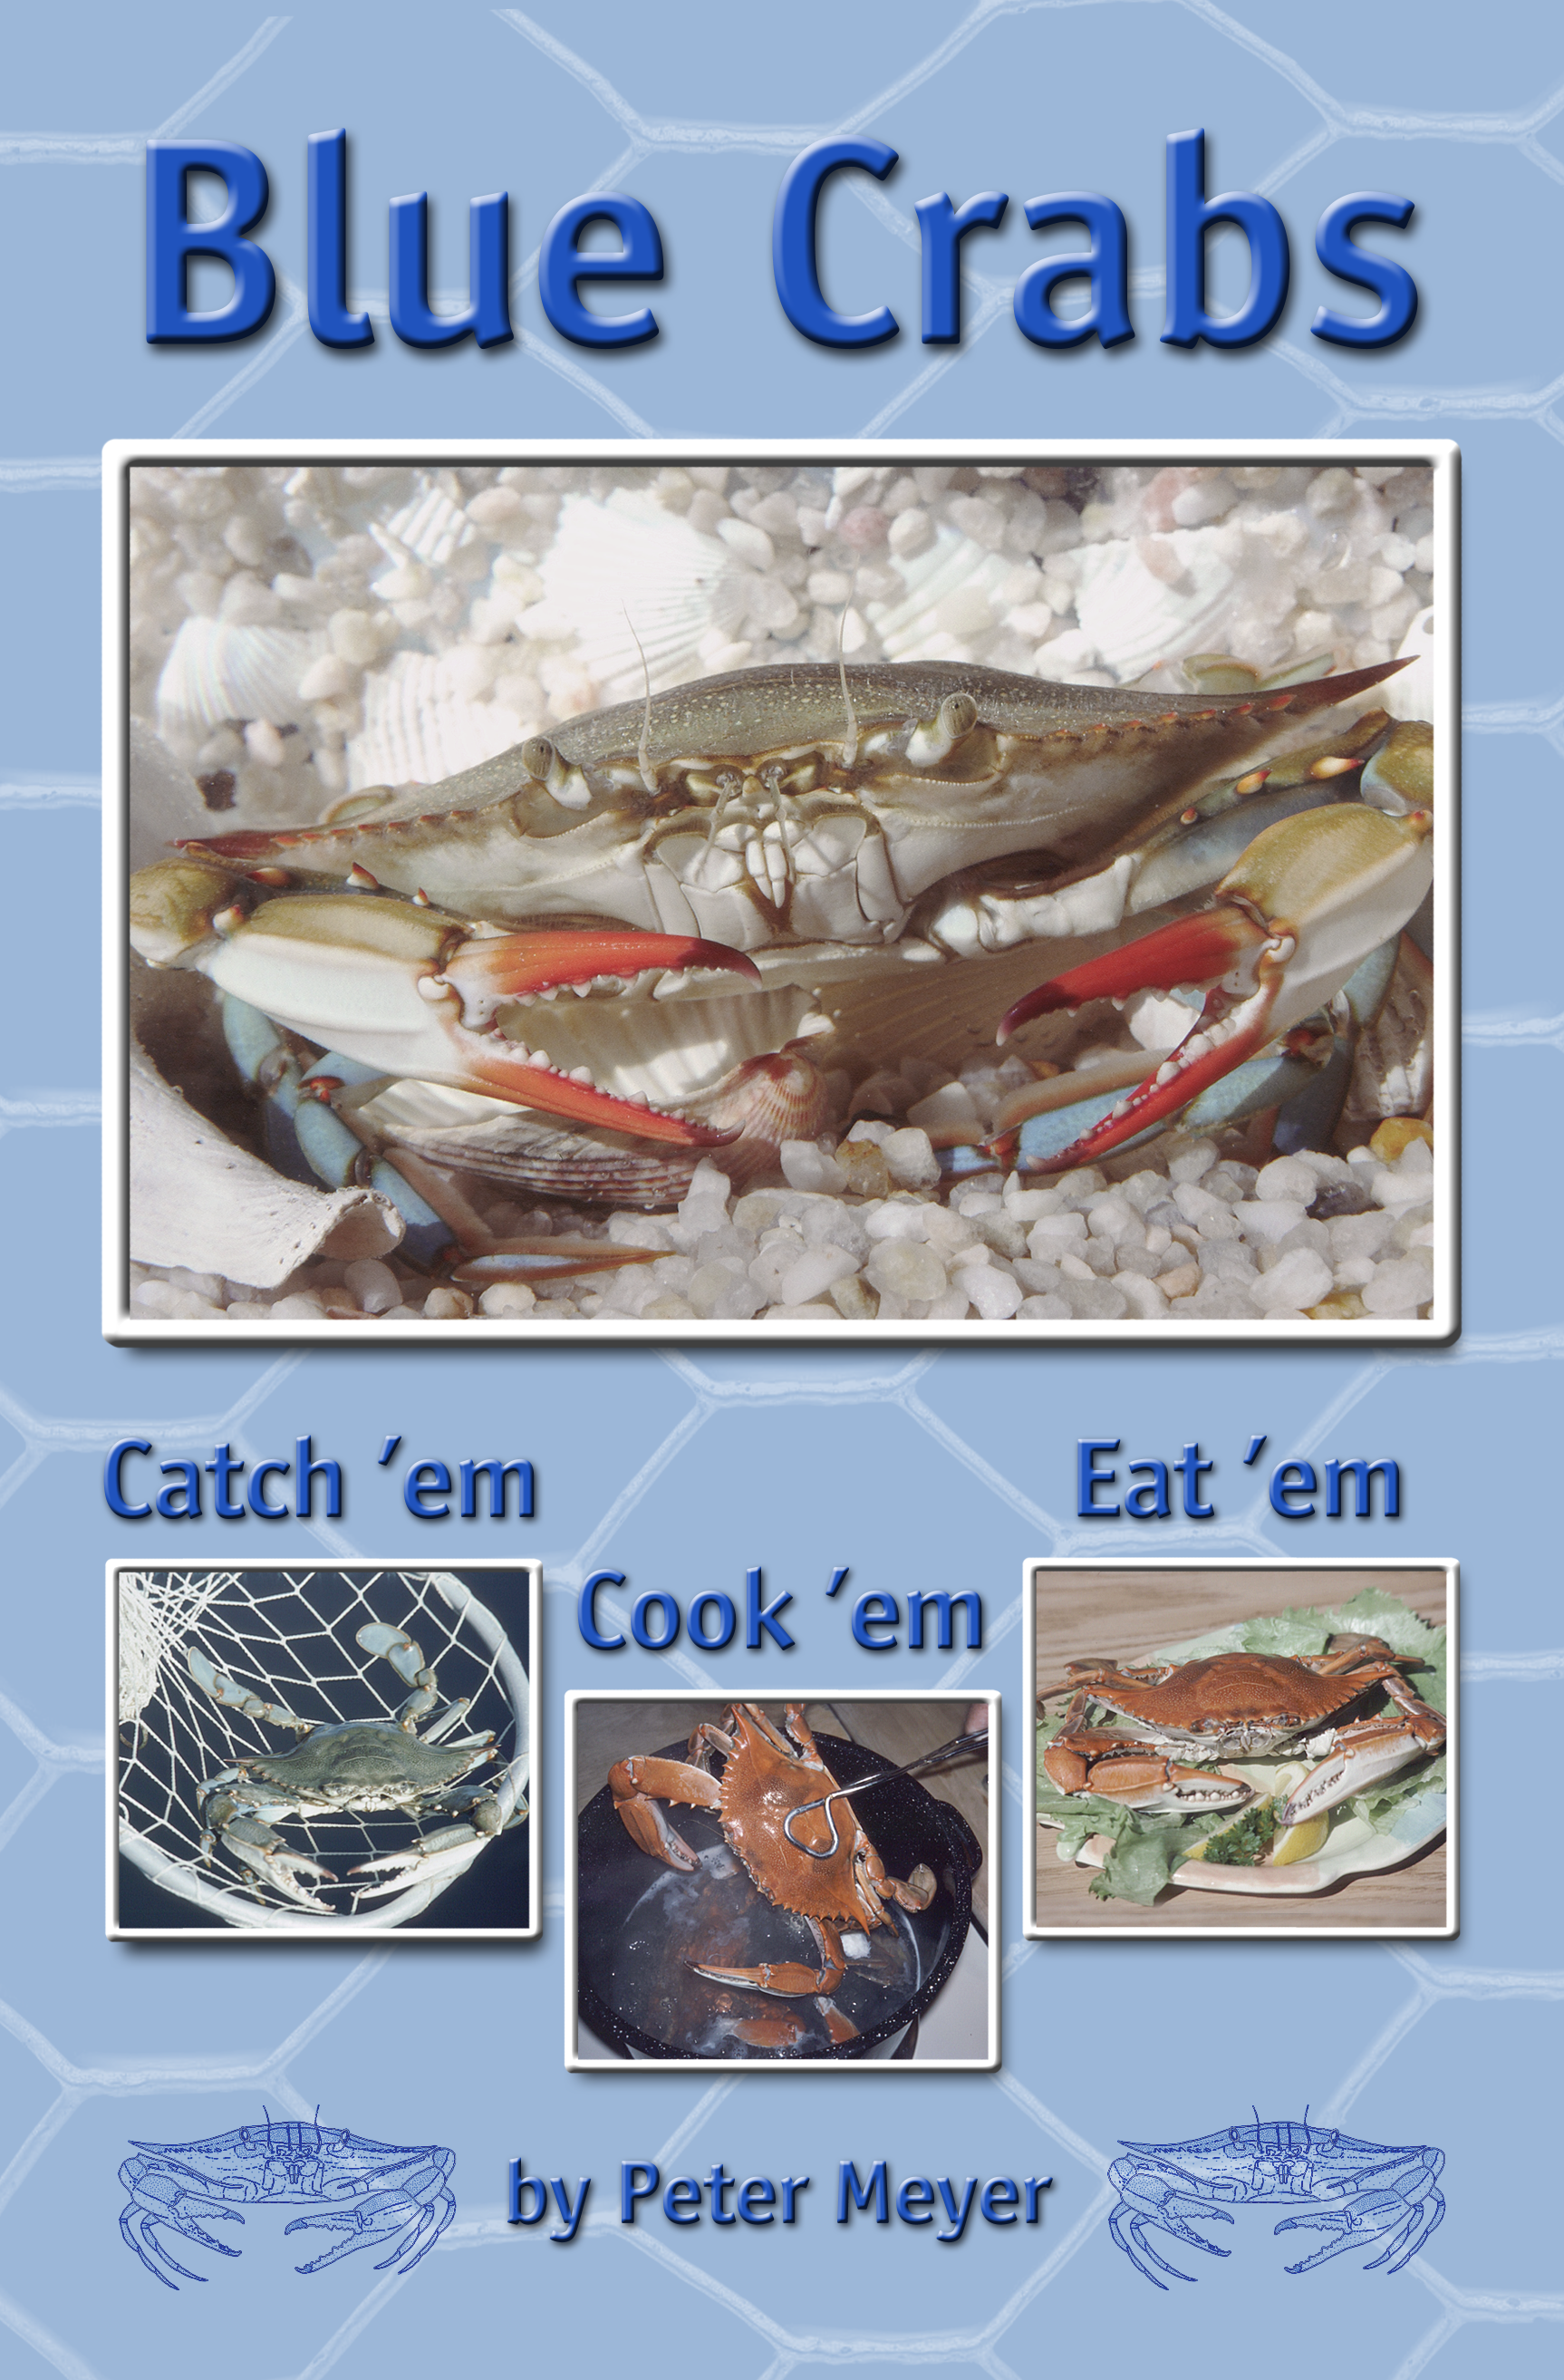 Catching Blue Crabs: How We Catch & Cook 'Em on Cape Cod